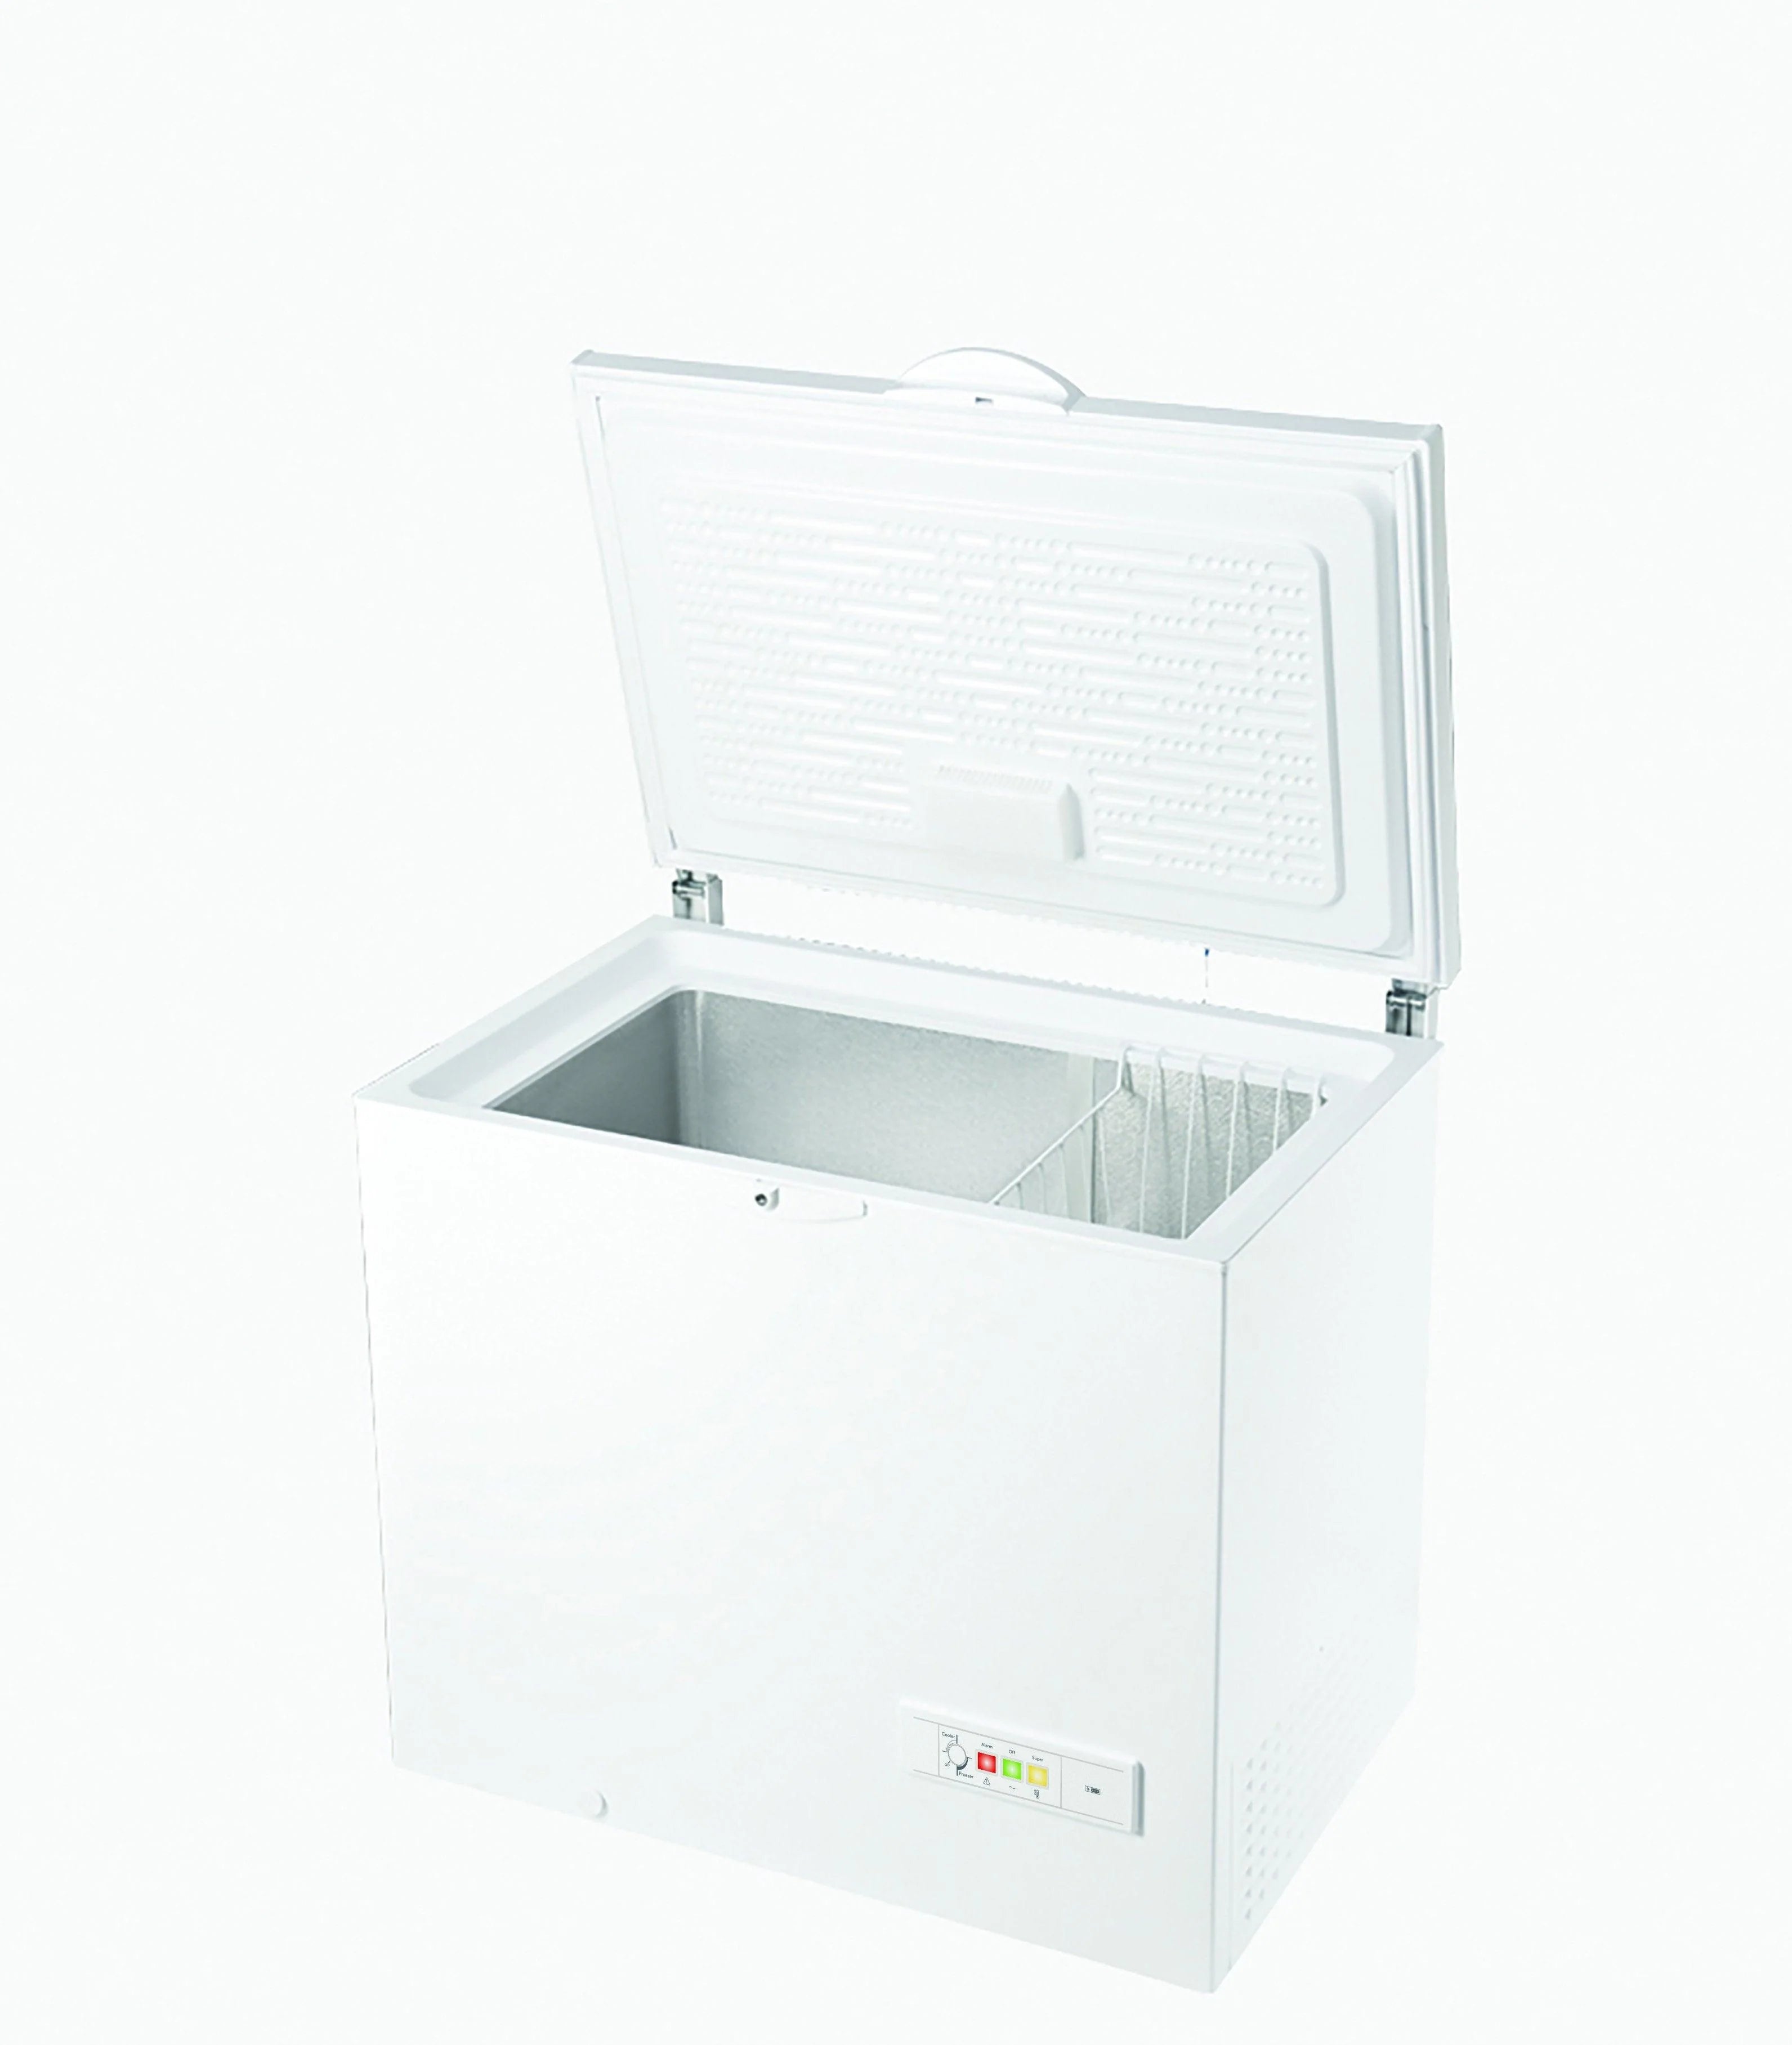 Indesit Chest Freezer - White | OS1A250H21 - Peter Murphy Lighting & Electrical Ltd